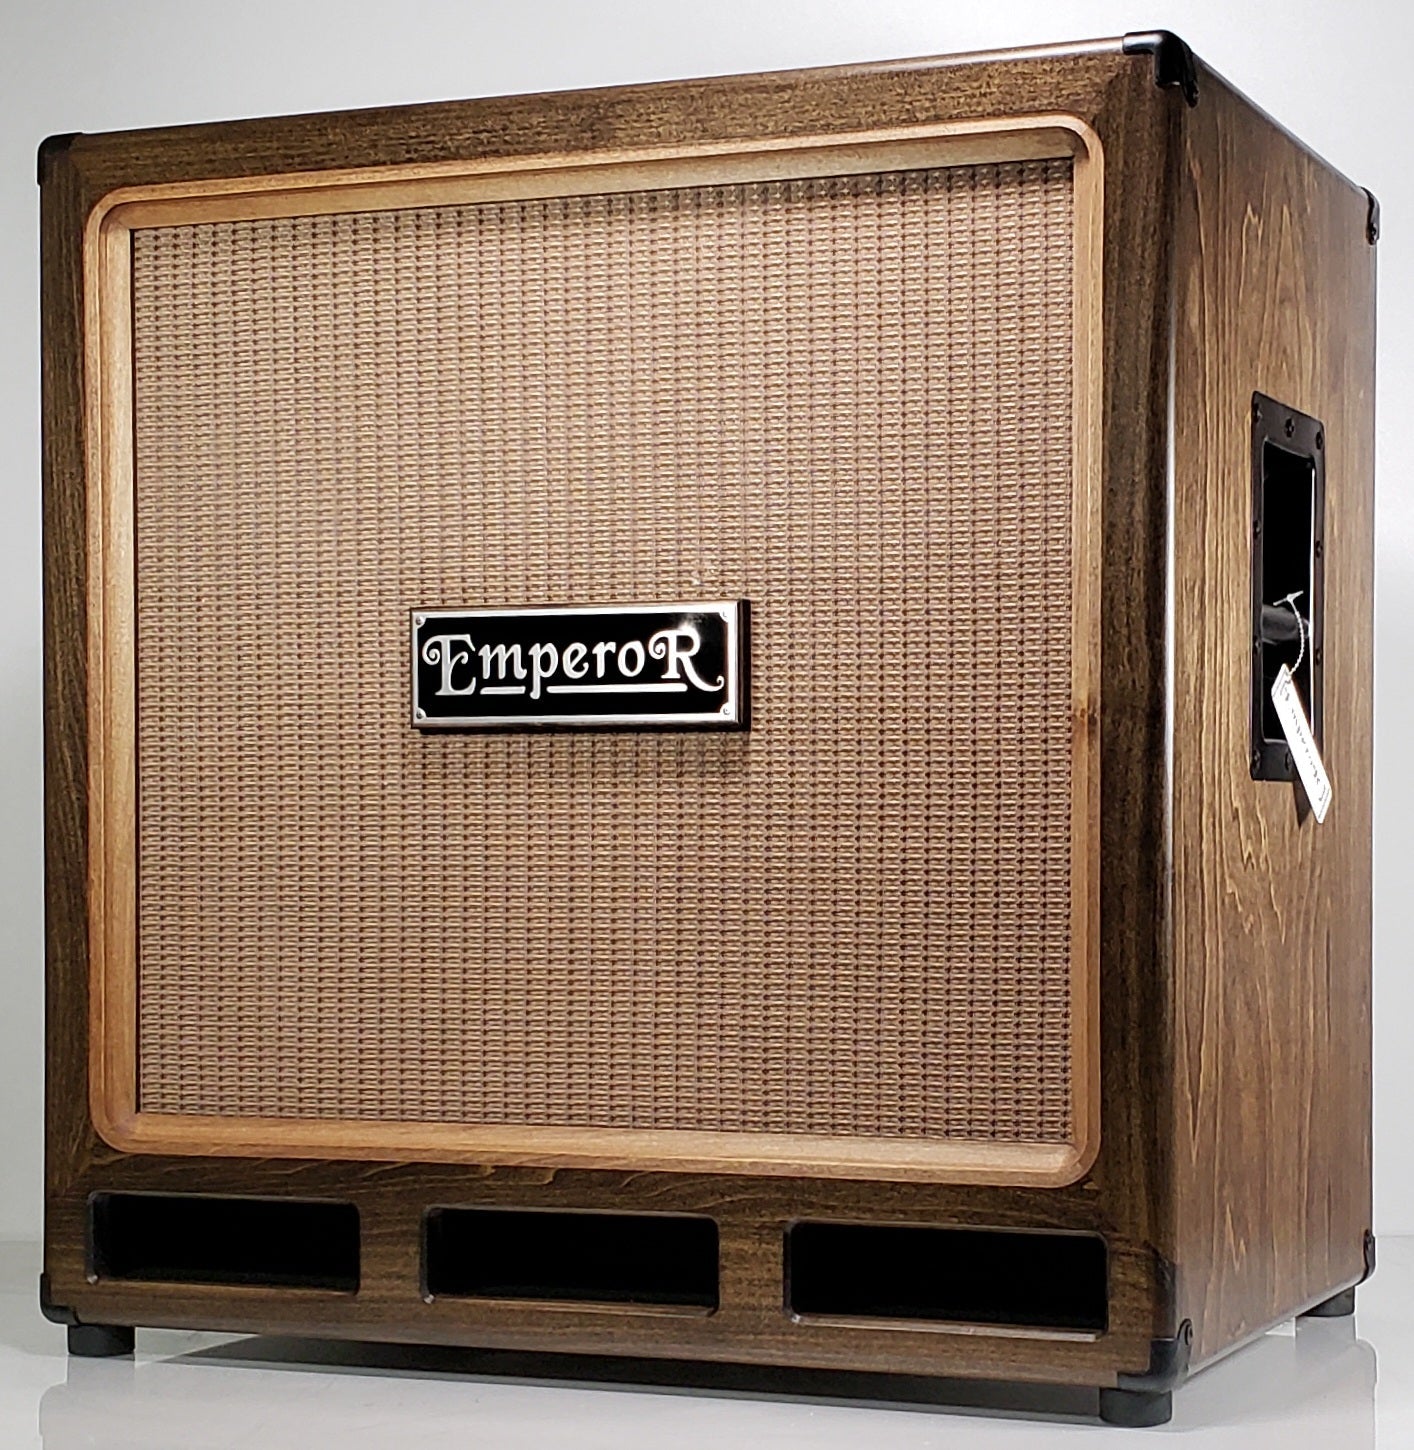 a 4x10 bass speaker cabinet made in the usa